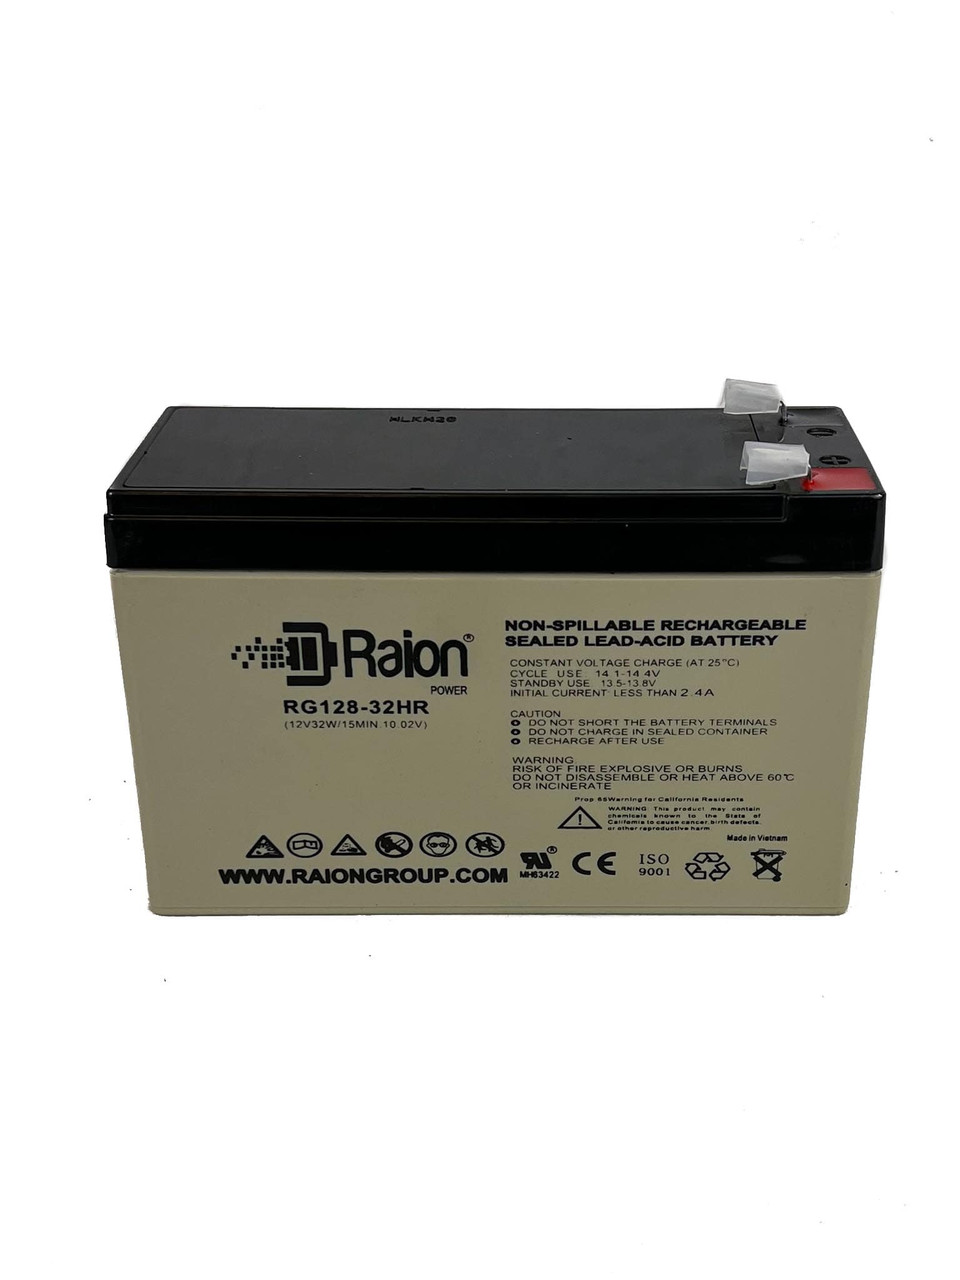 Raion Power RG128-32HR Replacement High Rate Battery Cartridge for Powerware 58700021